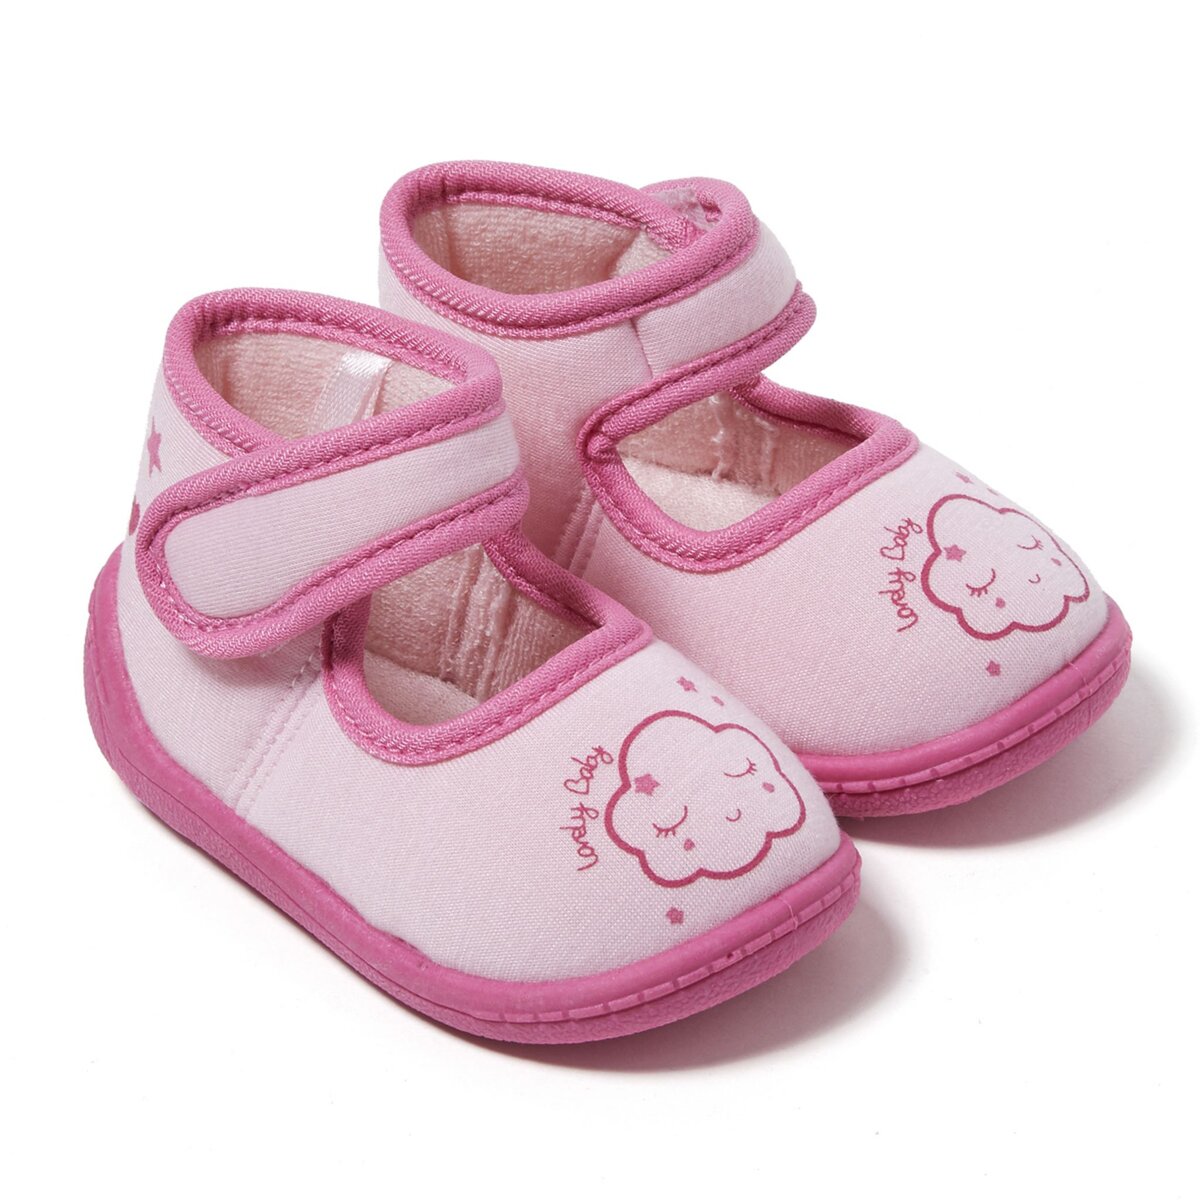 IN EXTENSO Chaussons bébé fille